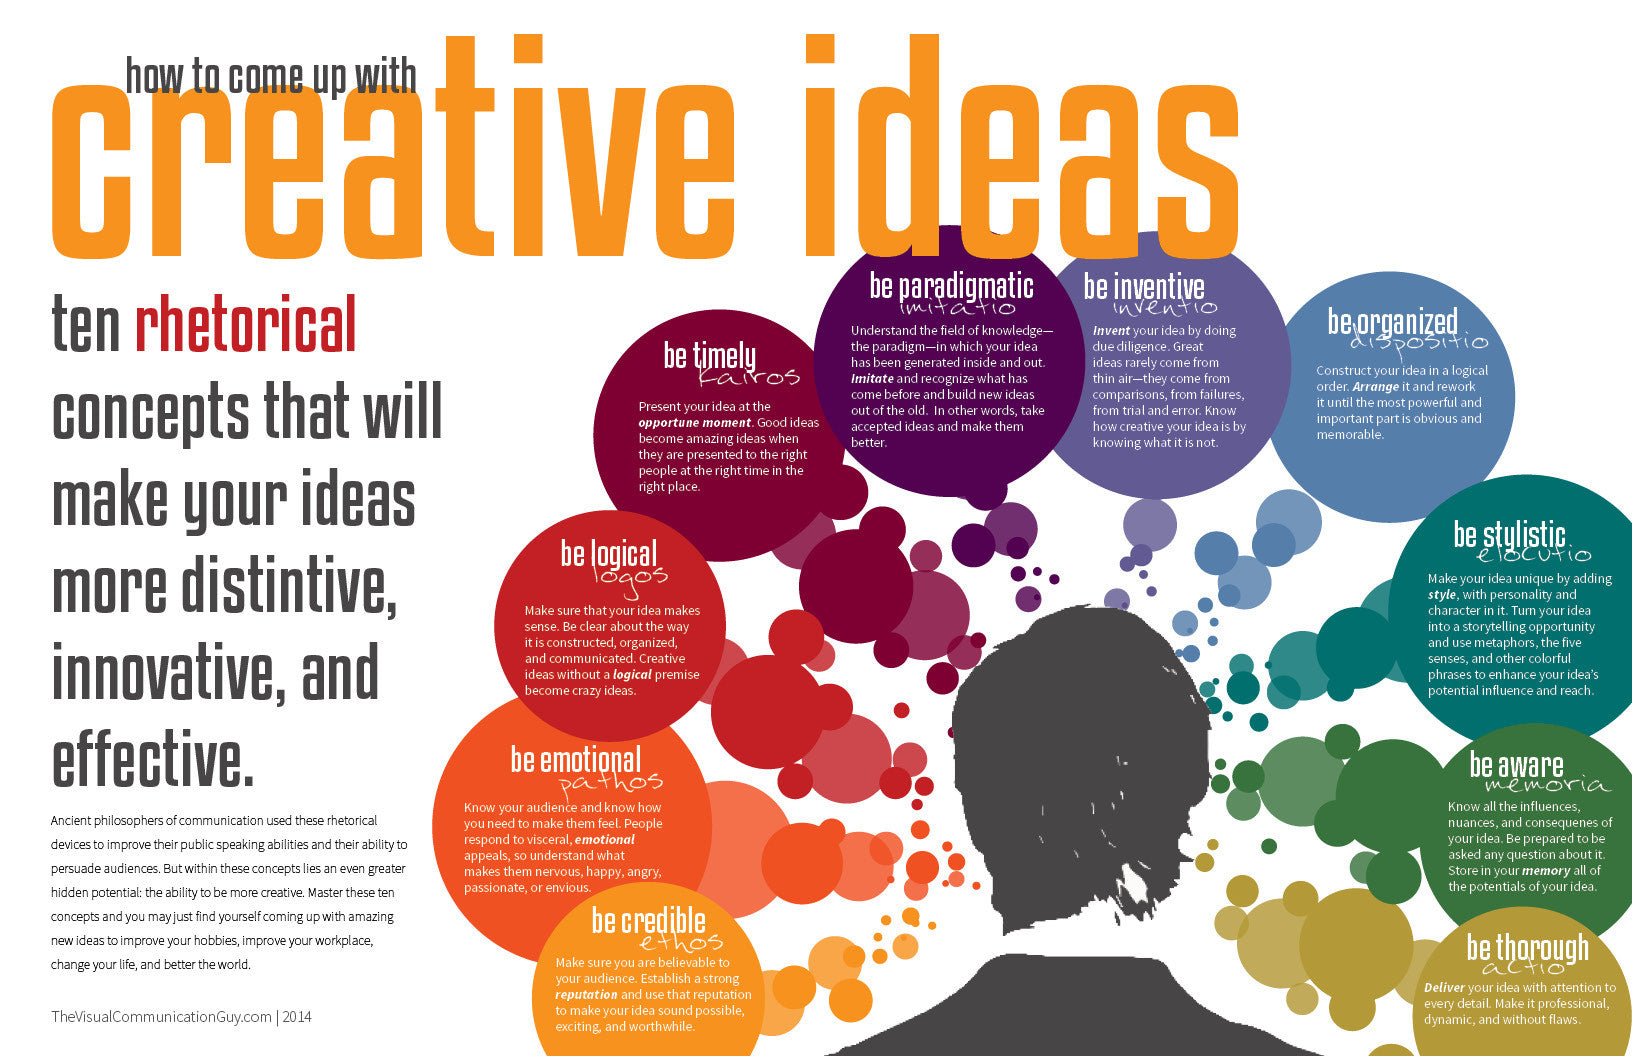 How to Come Up with Creative Ideas 19x28.5 Poster Print